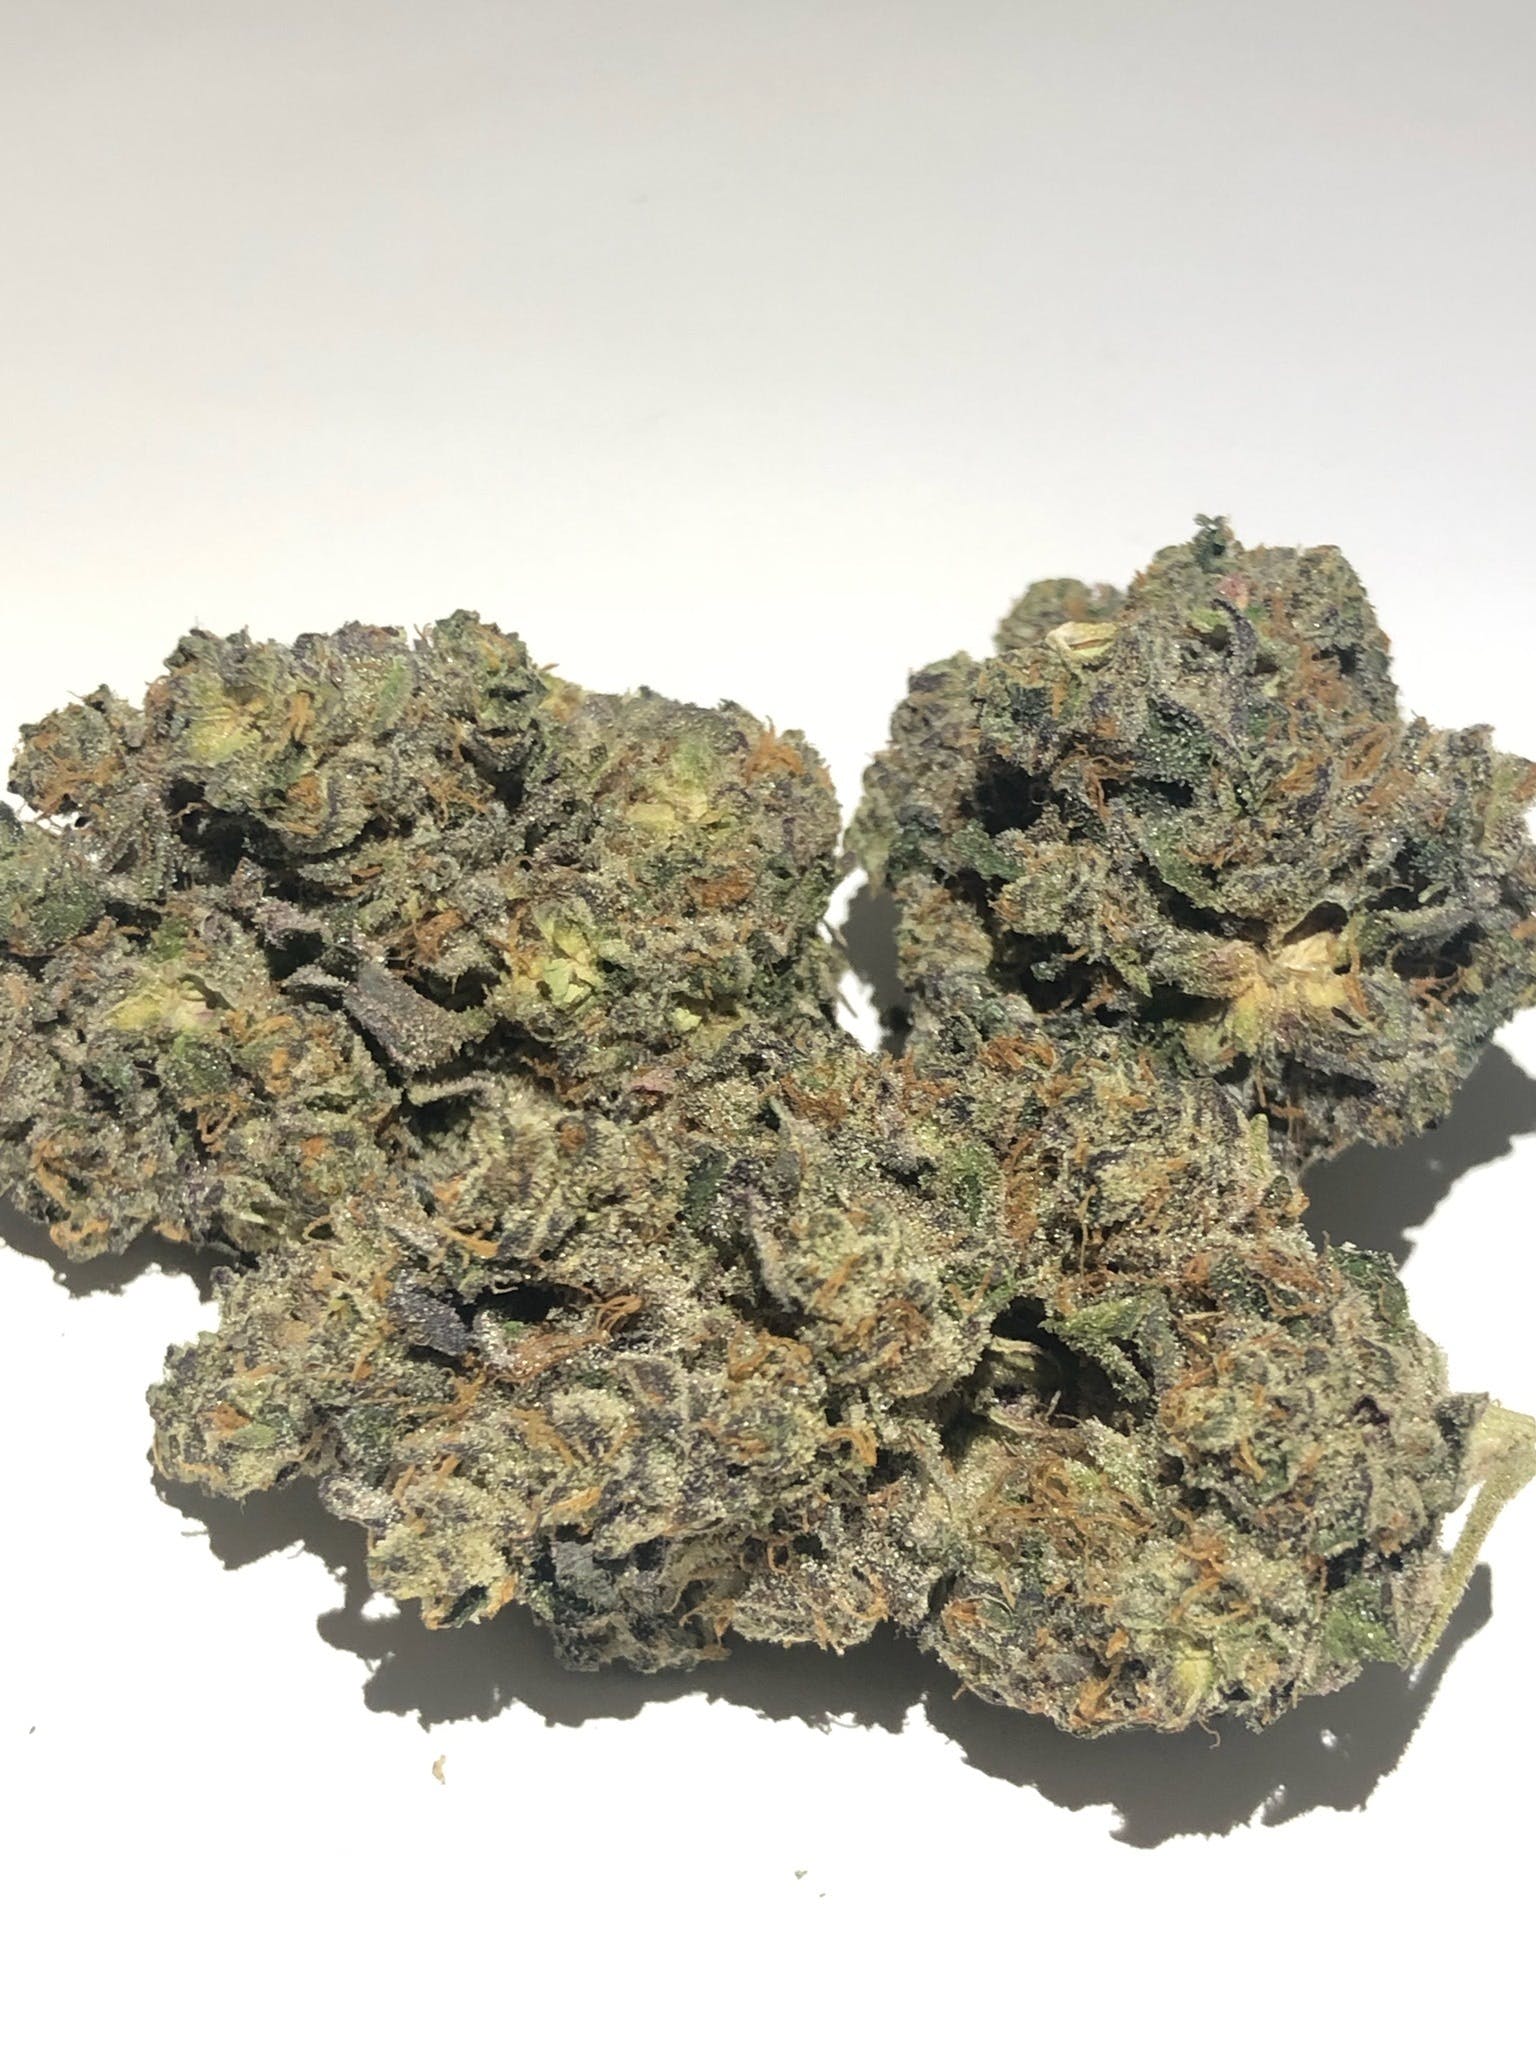 marijuana-dispensaries-by-appointment-only-2c-call-to-verify-fresno-berners-cookies-24220-ounce-special